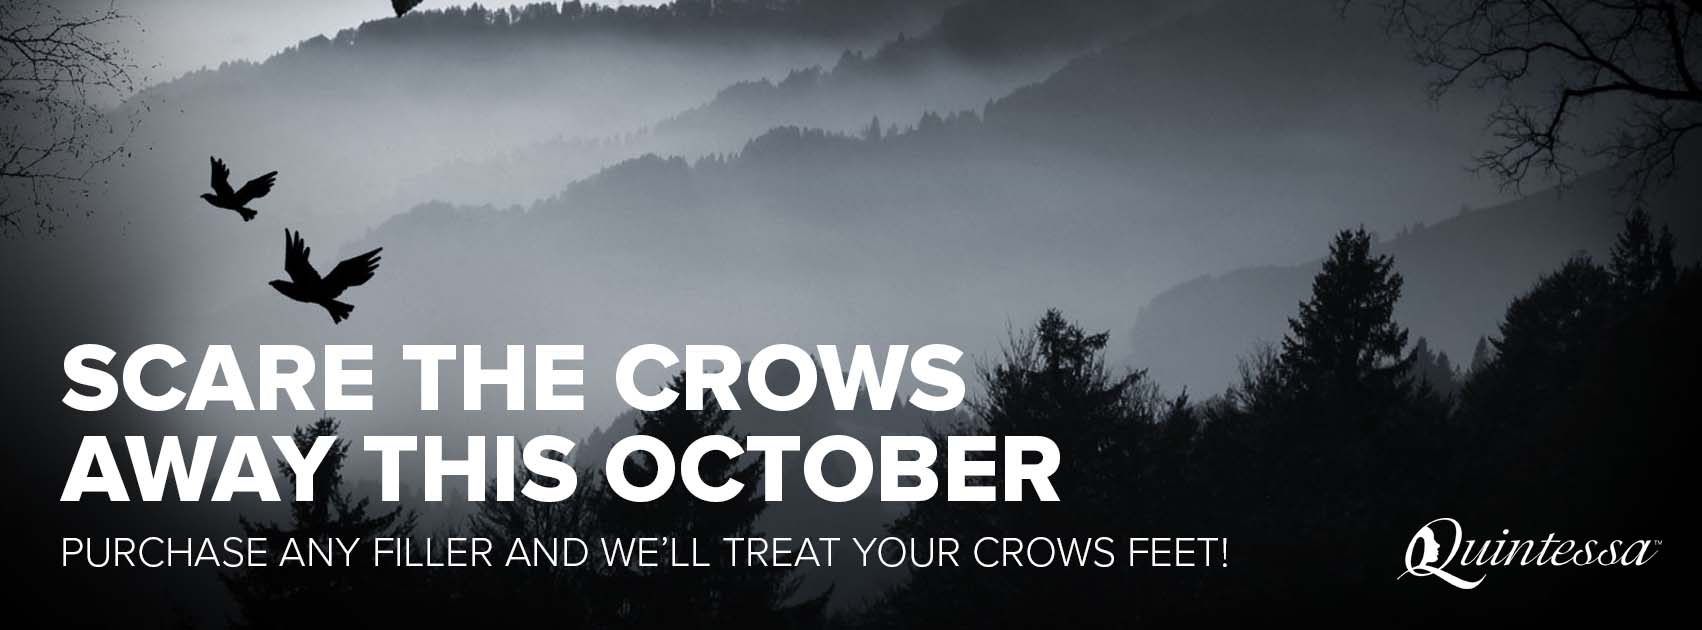 October Promotion - Scare the Crows Away